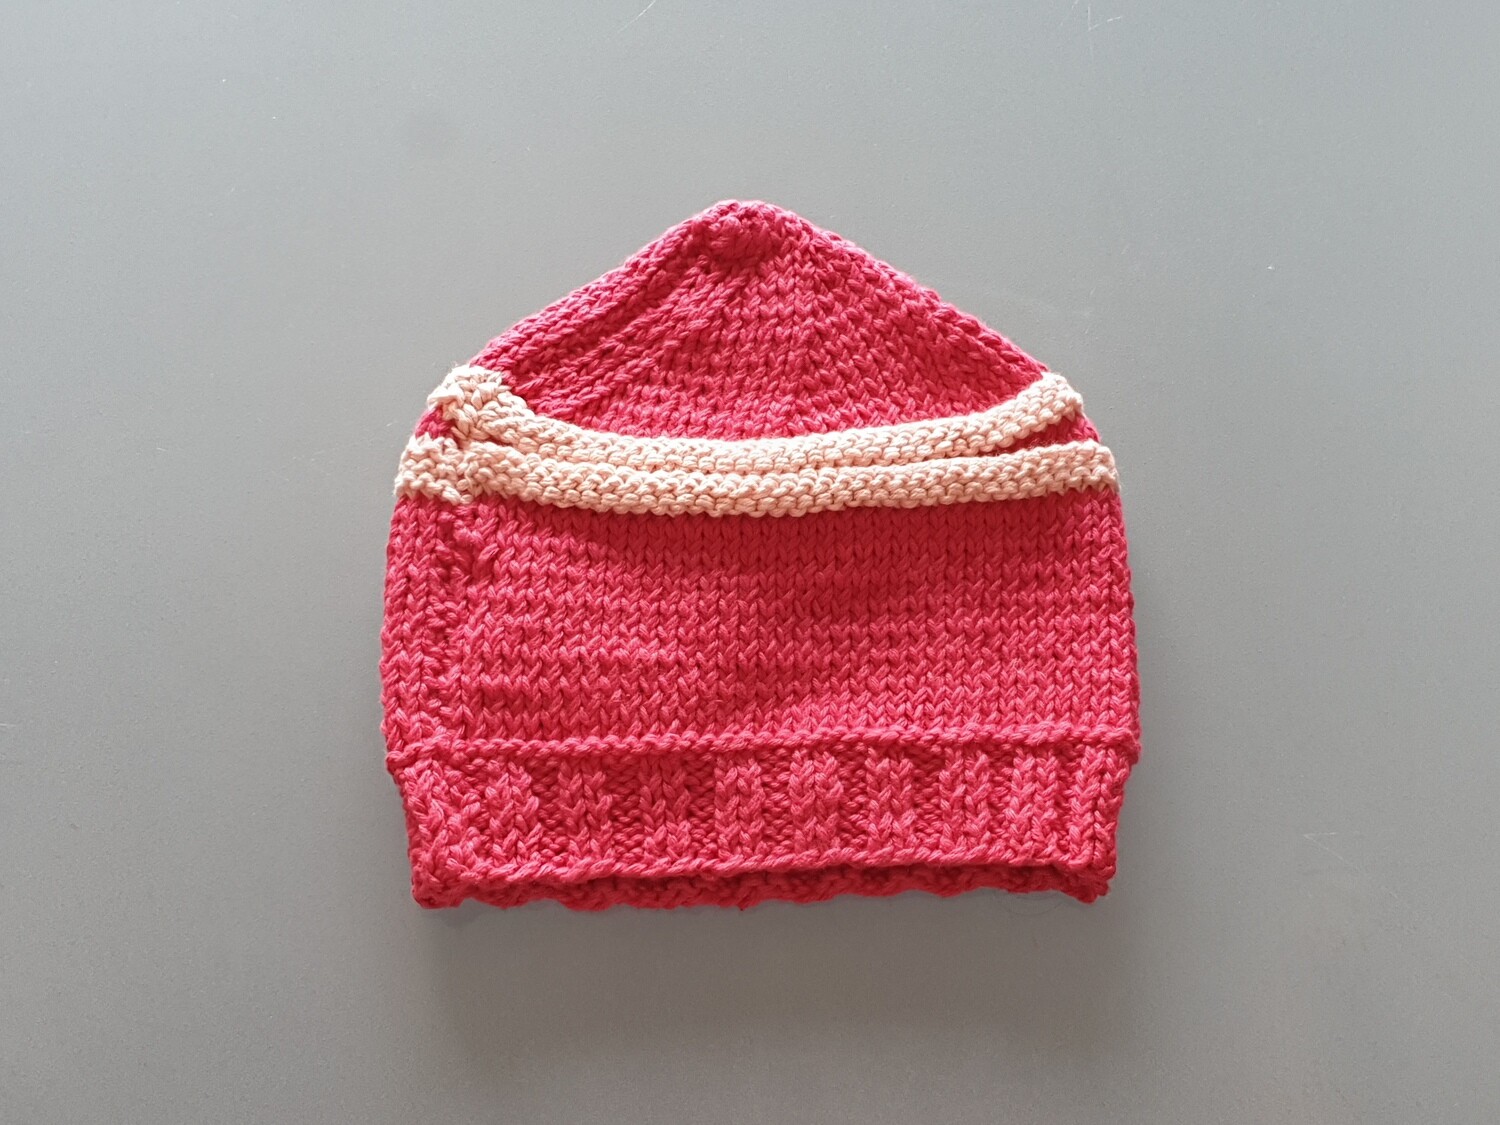 Knit Cotton Cap Red & Pink (Large)